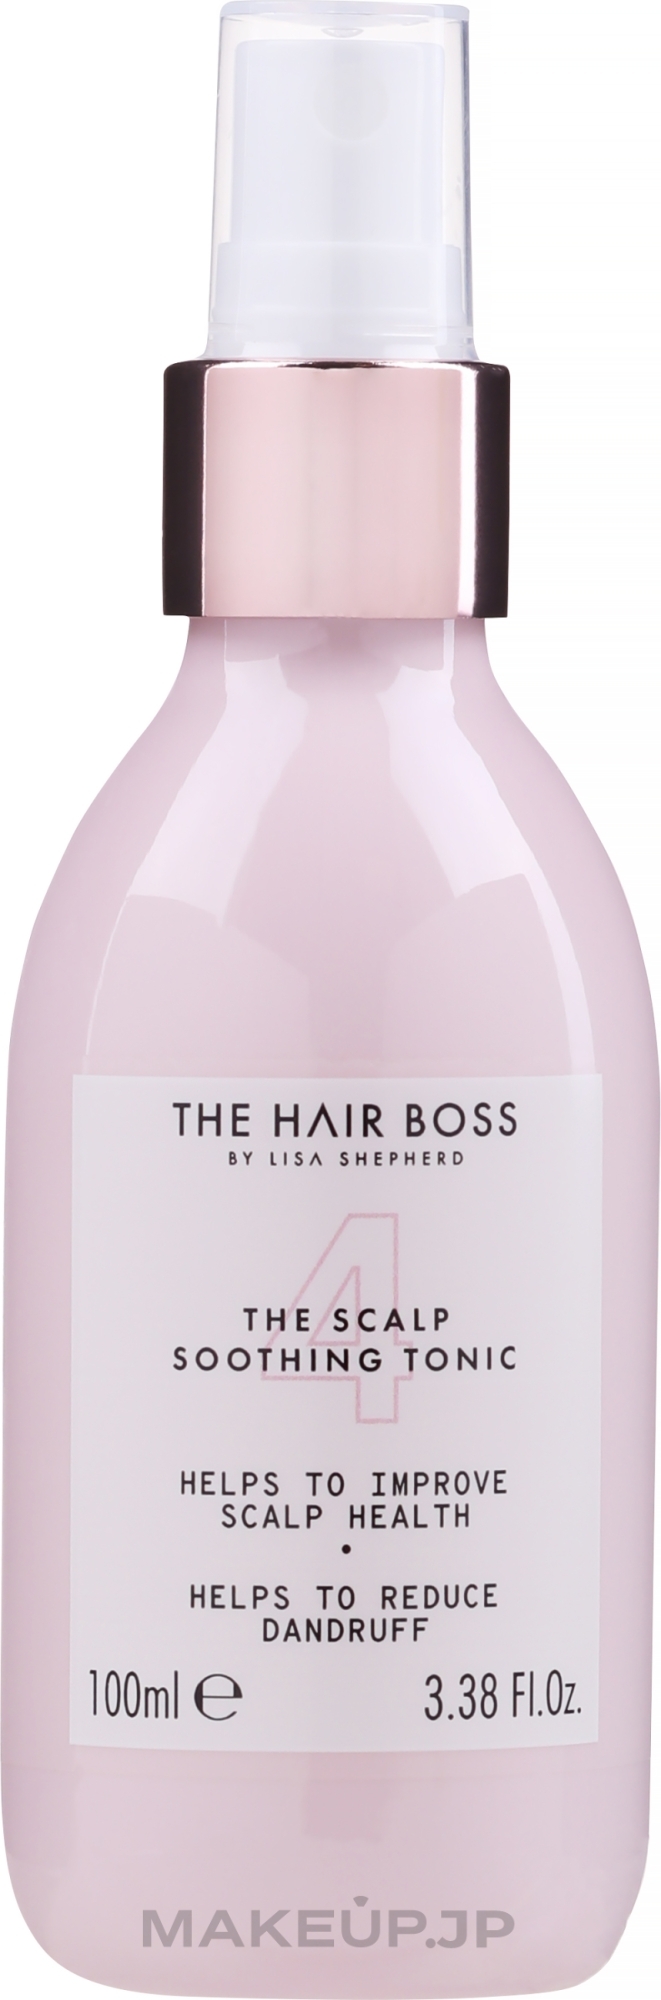 Soothing Scalp Tonic - The Hair Boss The Scalp Soothing Tonic — photo 100 ml